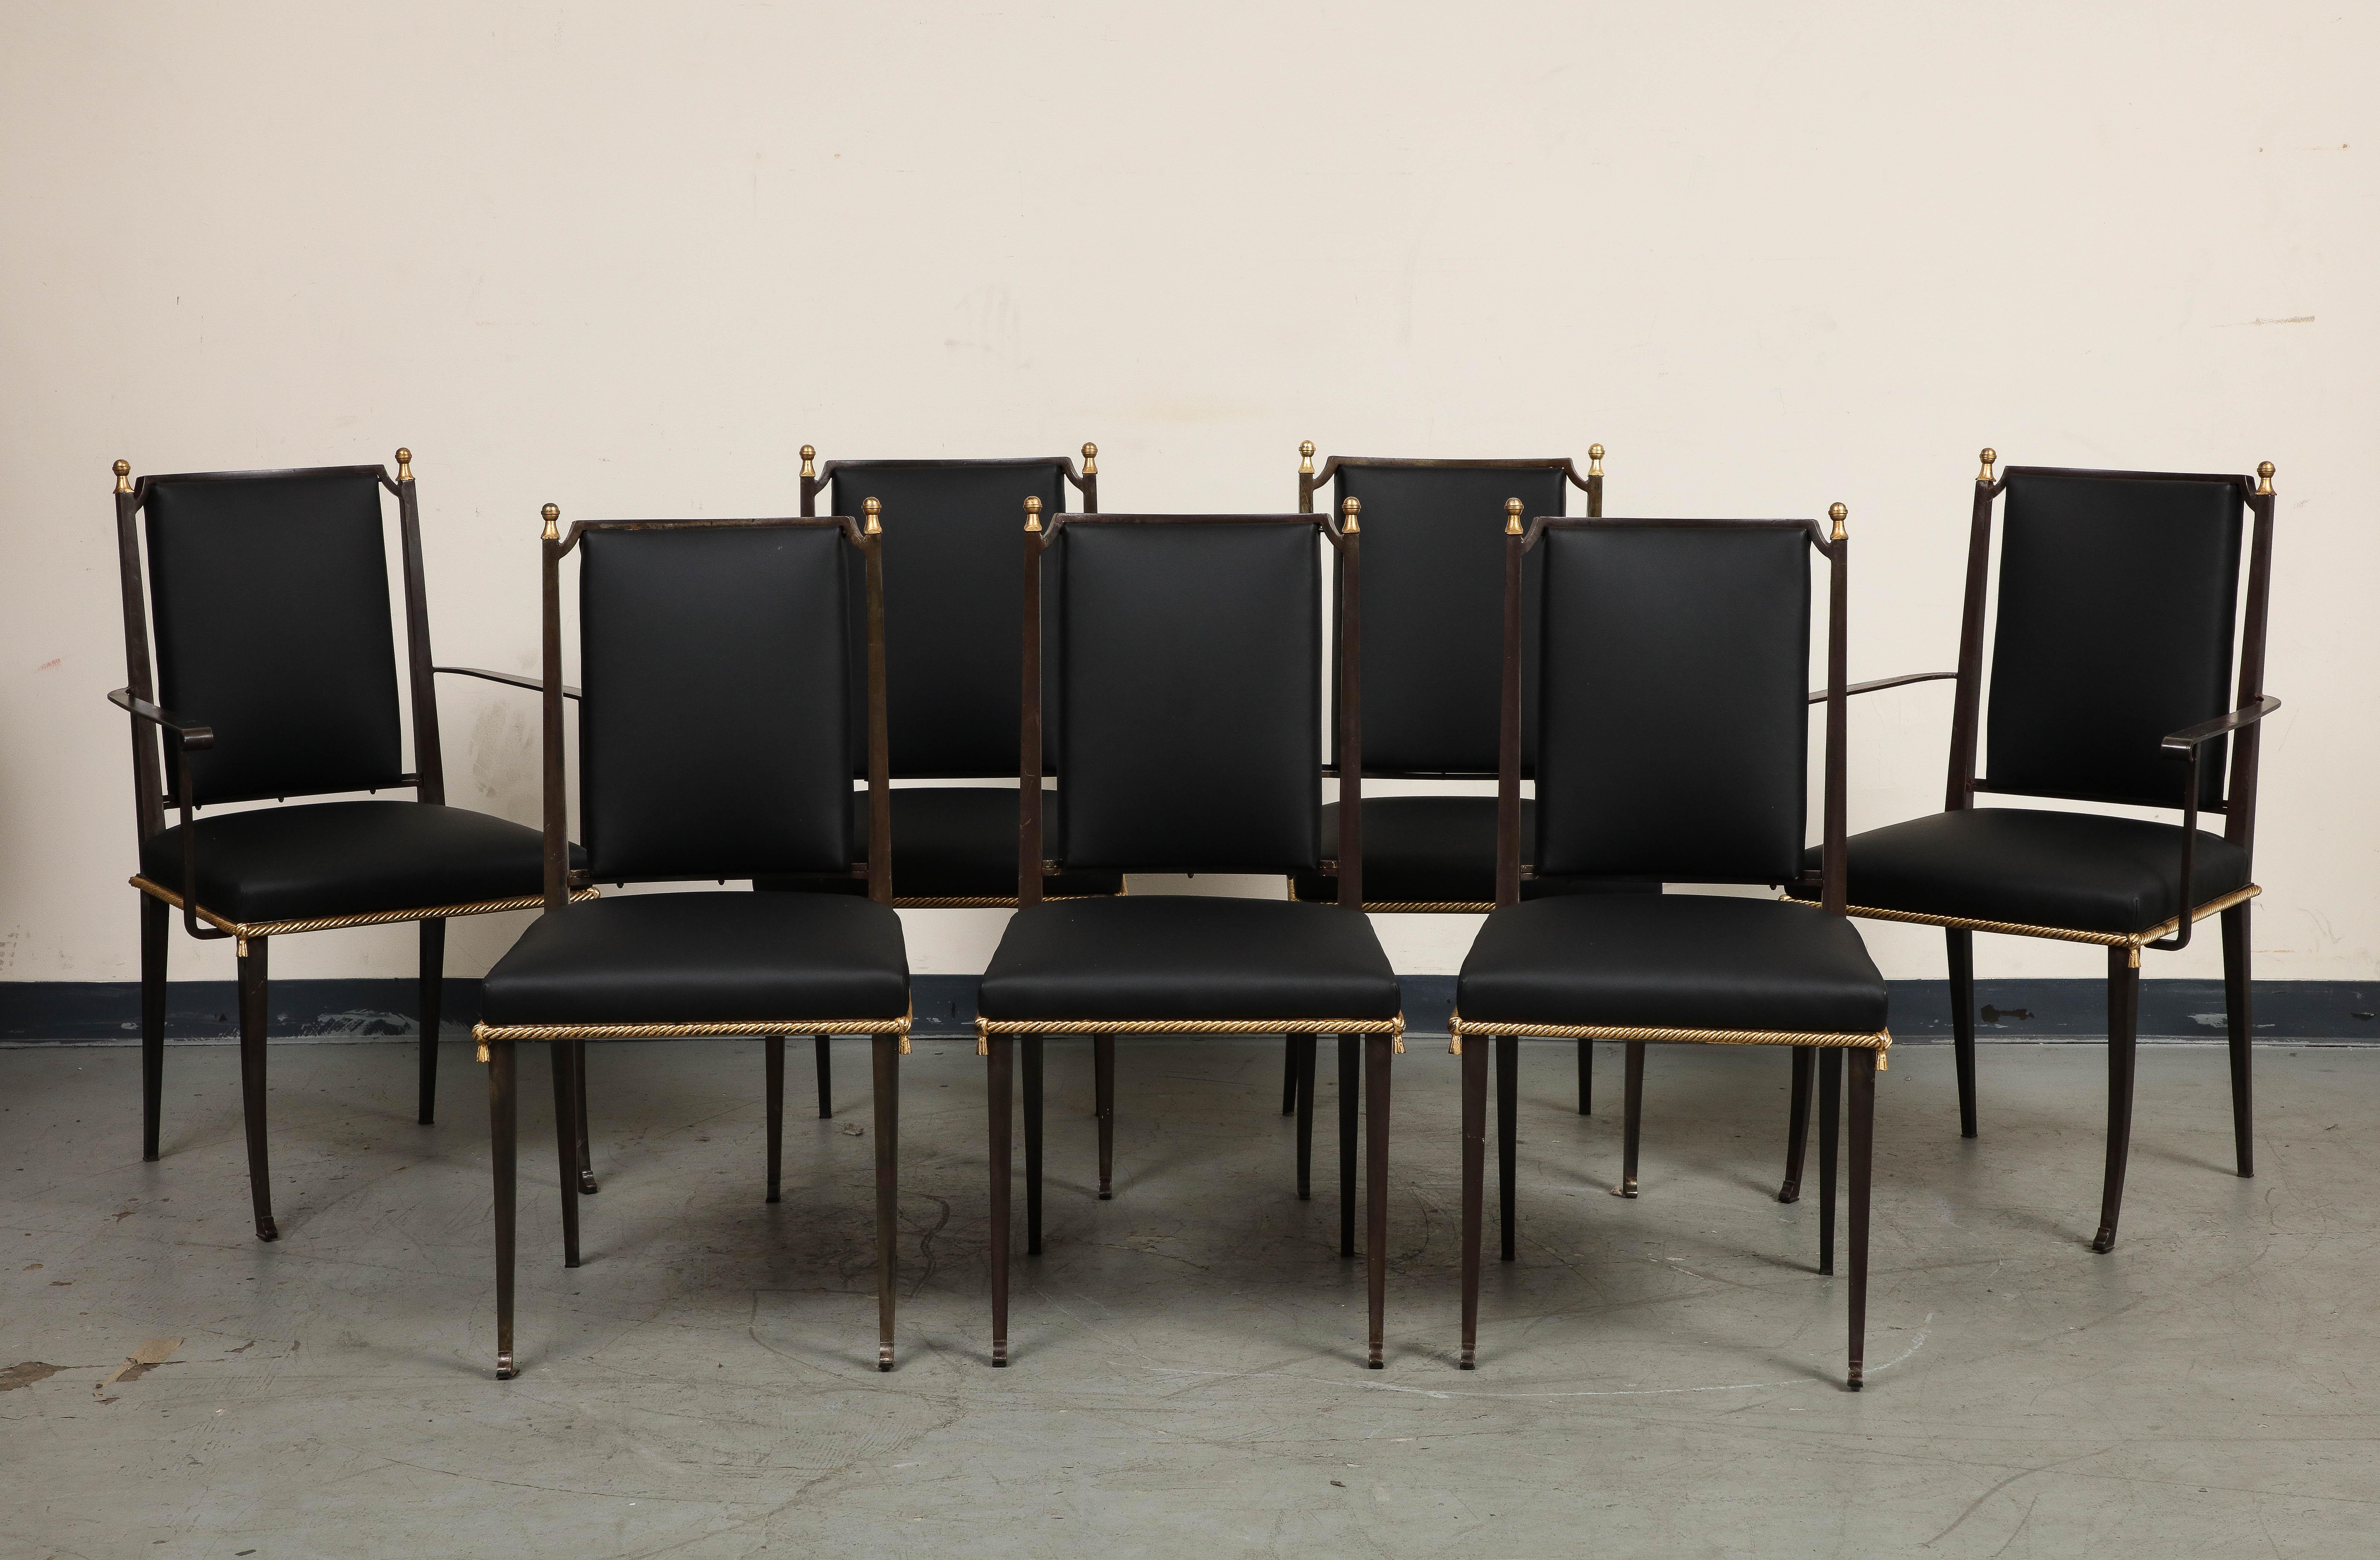 Set of 7 midcentury French dining chairs with blackened iron frames and new black leather upholstery. Gilt highlights include a cord-shaped trim around the seat, the button at the center of the x-back, and finials at the top of the back. 

Two (2)